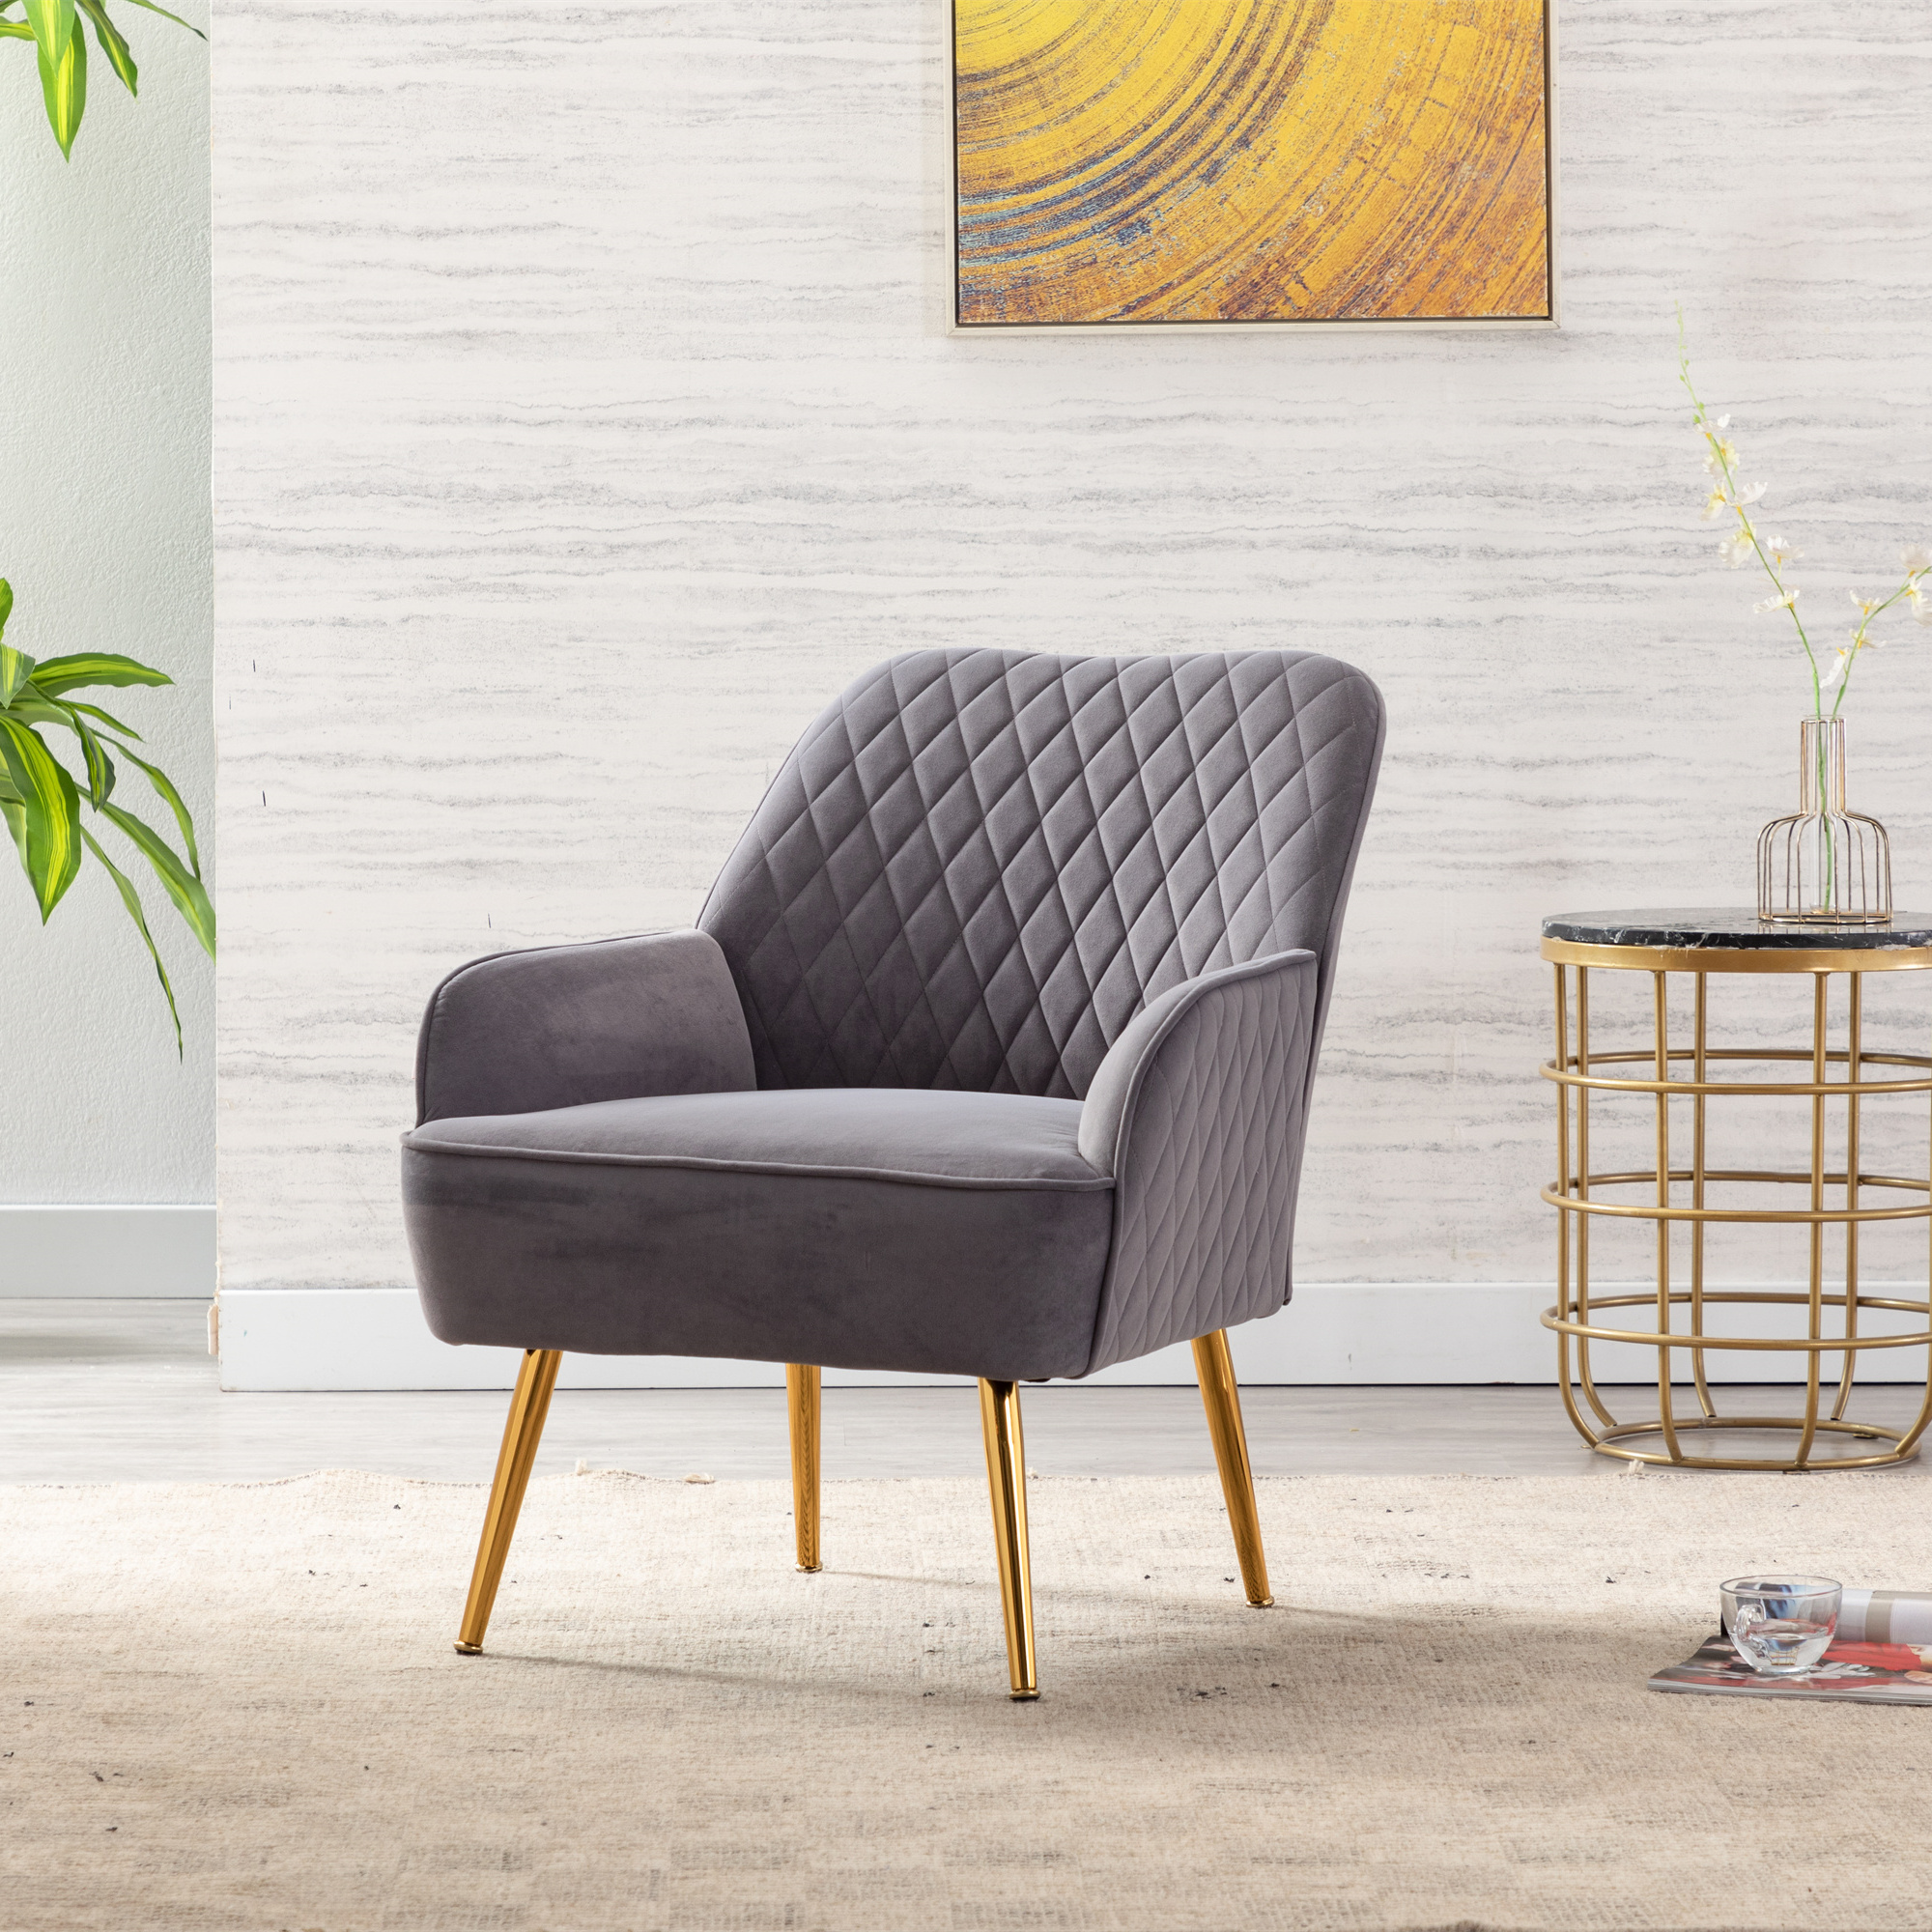 Modern Soft Velvet Material Dark Green Ergonomics Accent Chair Living Room Chair Bedroom Chair Home Chair With Gold Legs And Adjustable Legs For Indoor Home Grey-Boyel Living